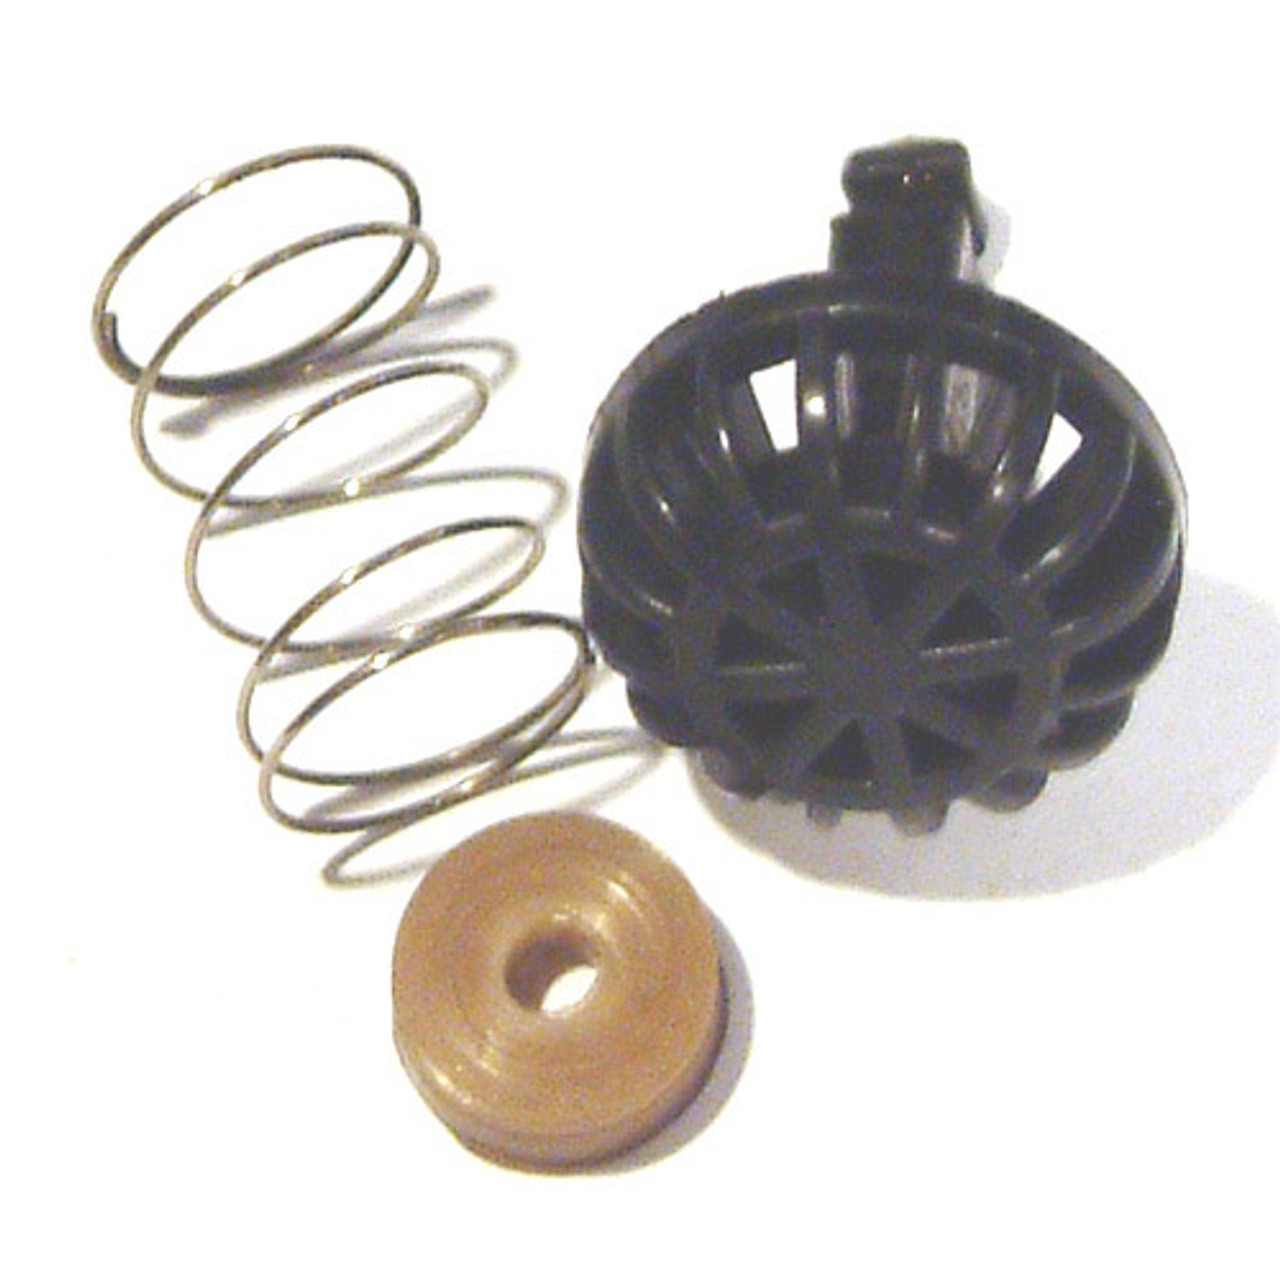 coffee maker filter brew basket dw12-09-2 replacement part